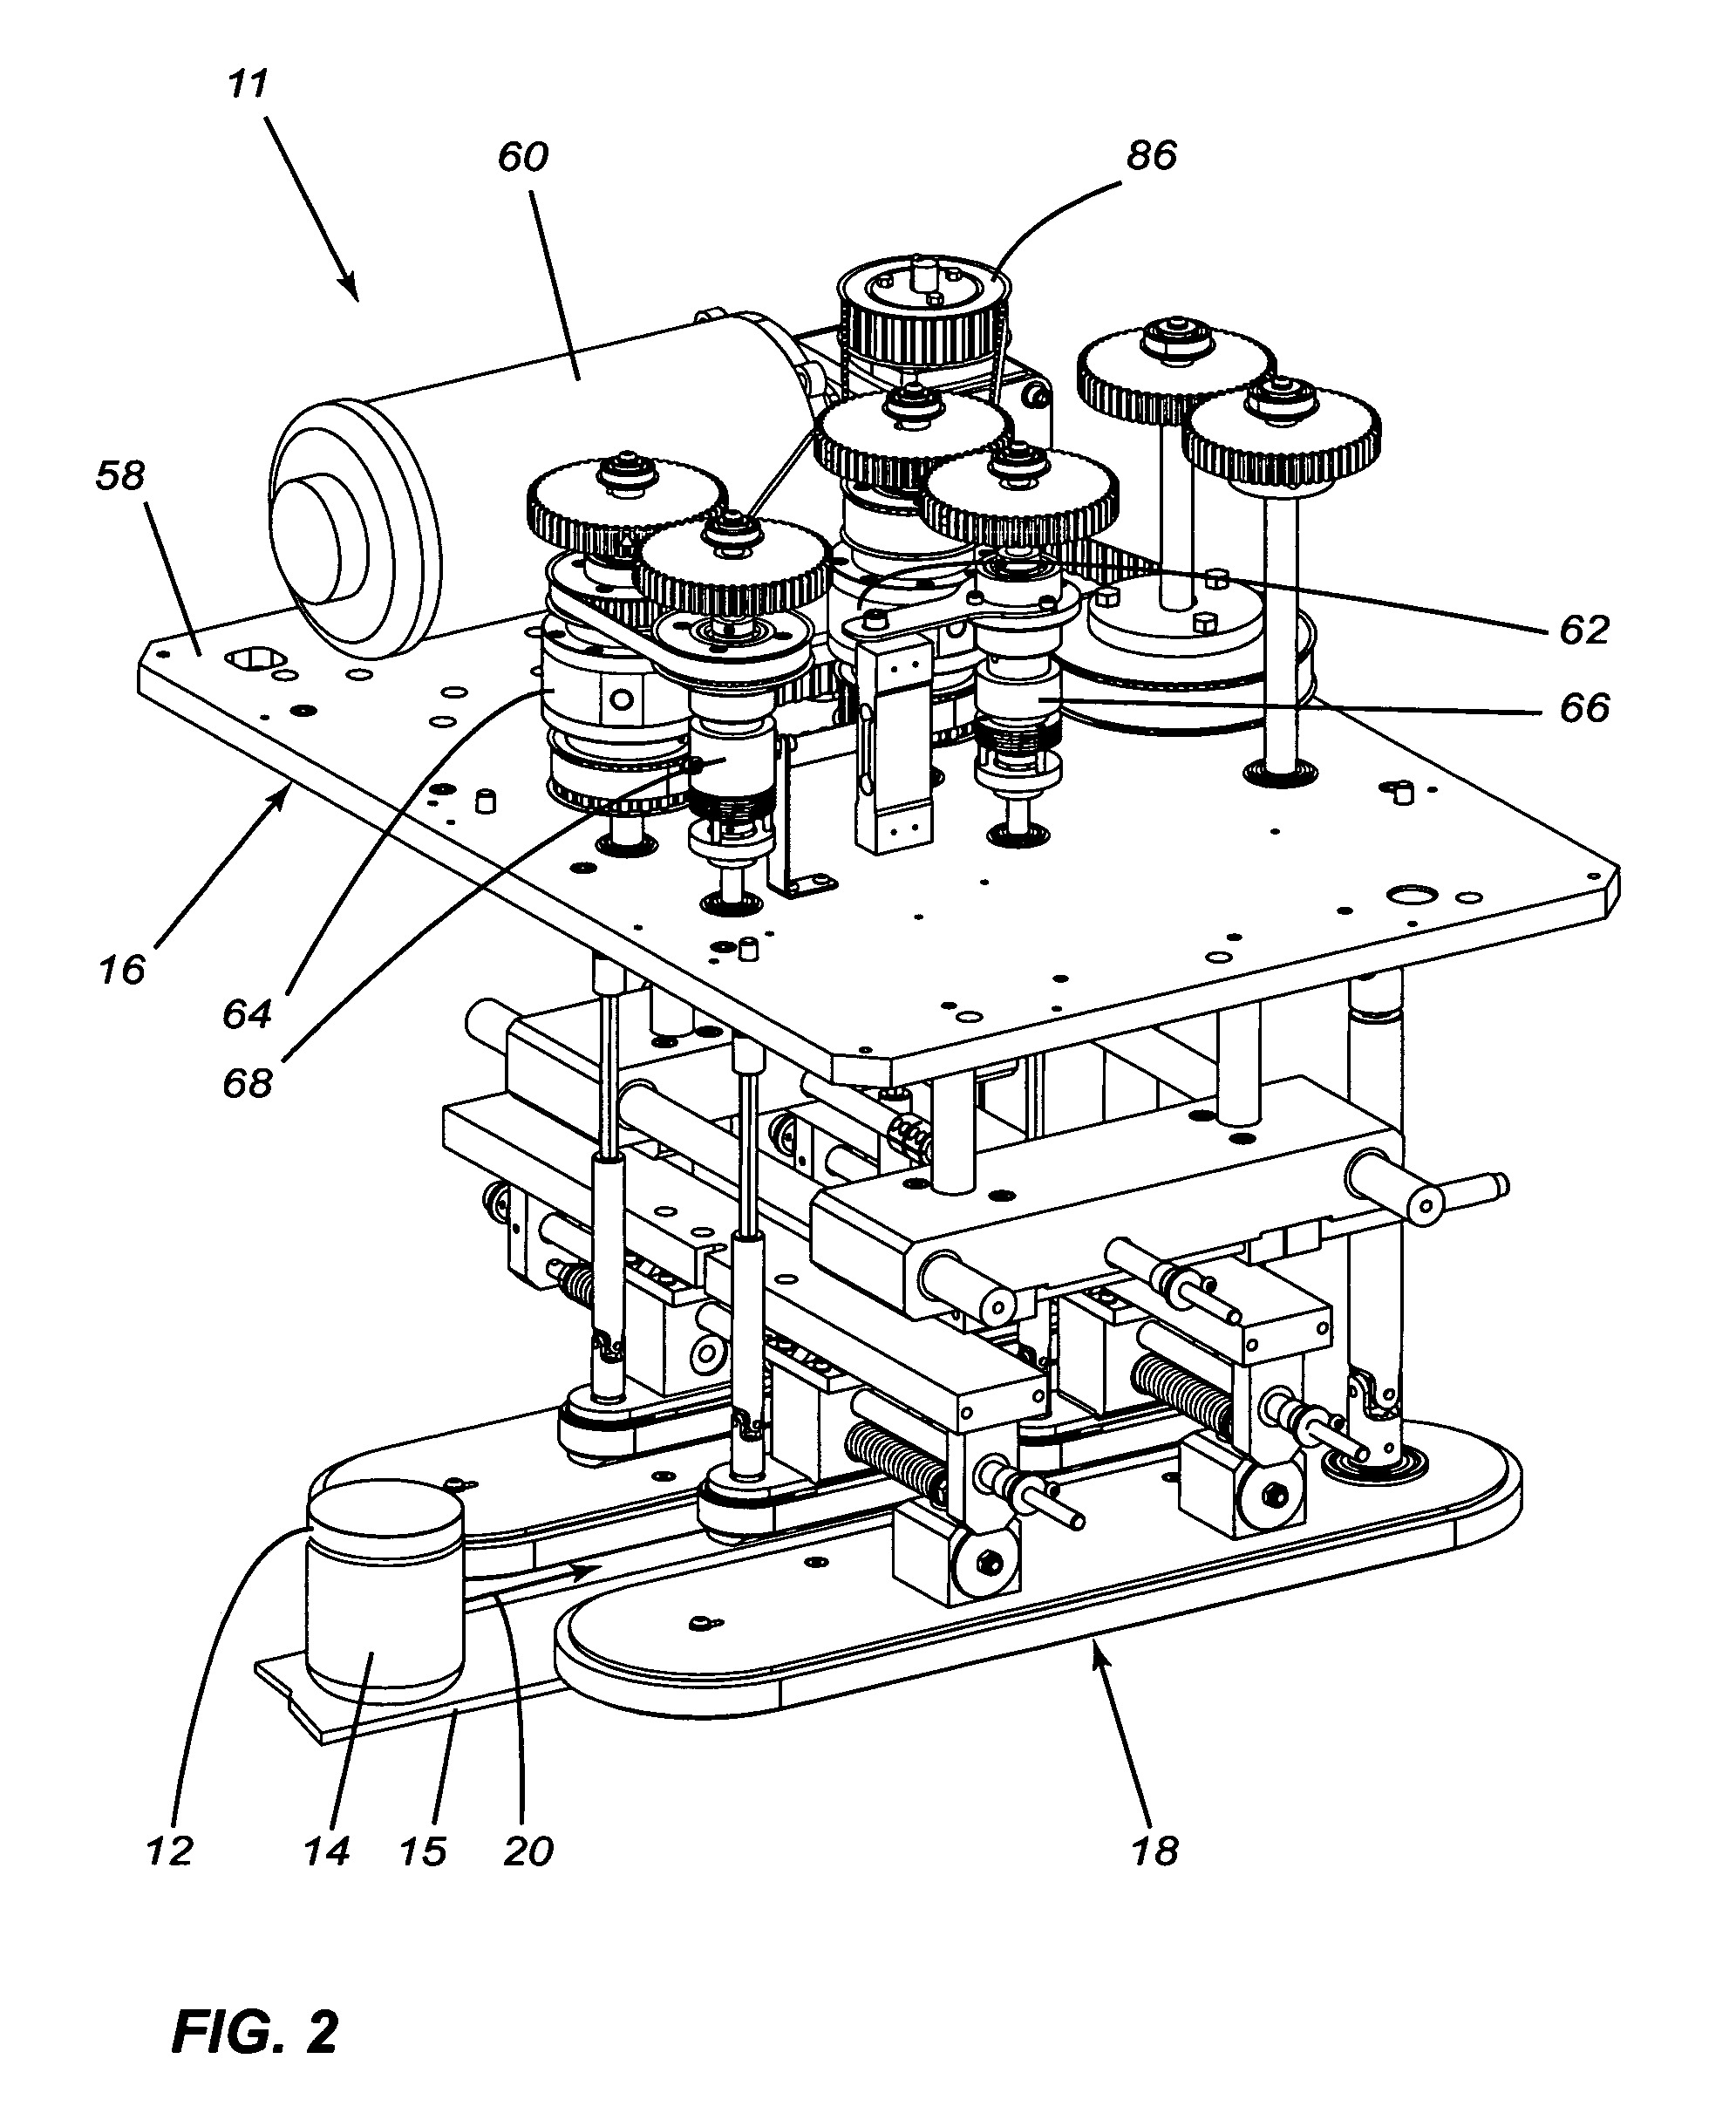 Apparatus and method for rotating a cap relatively to a container